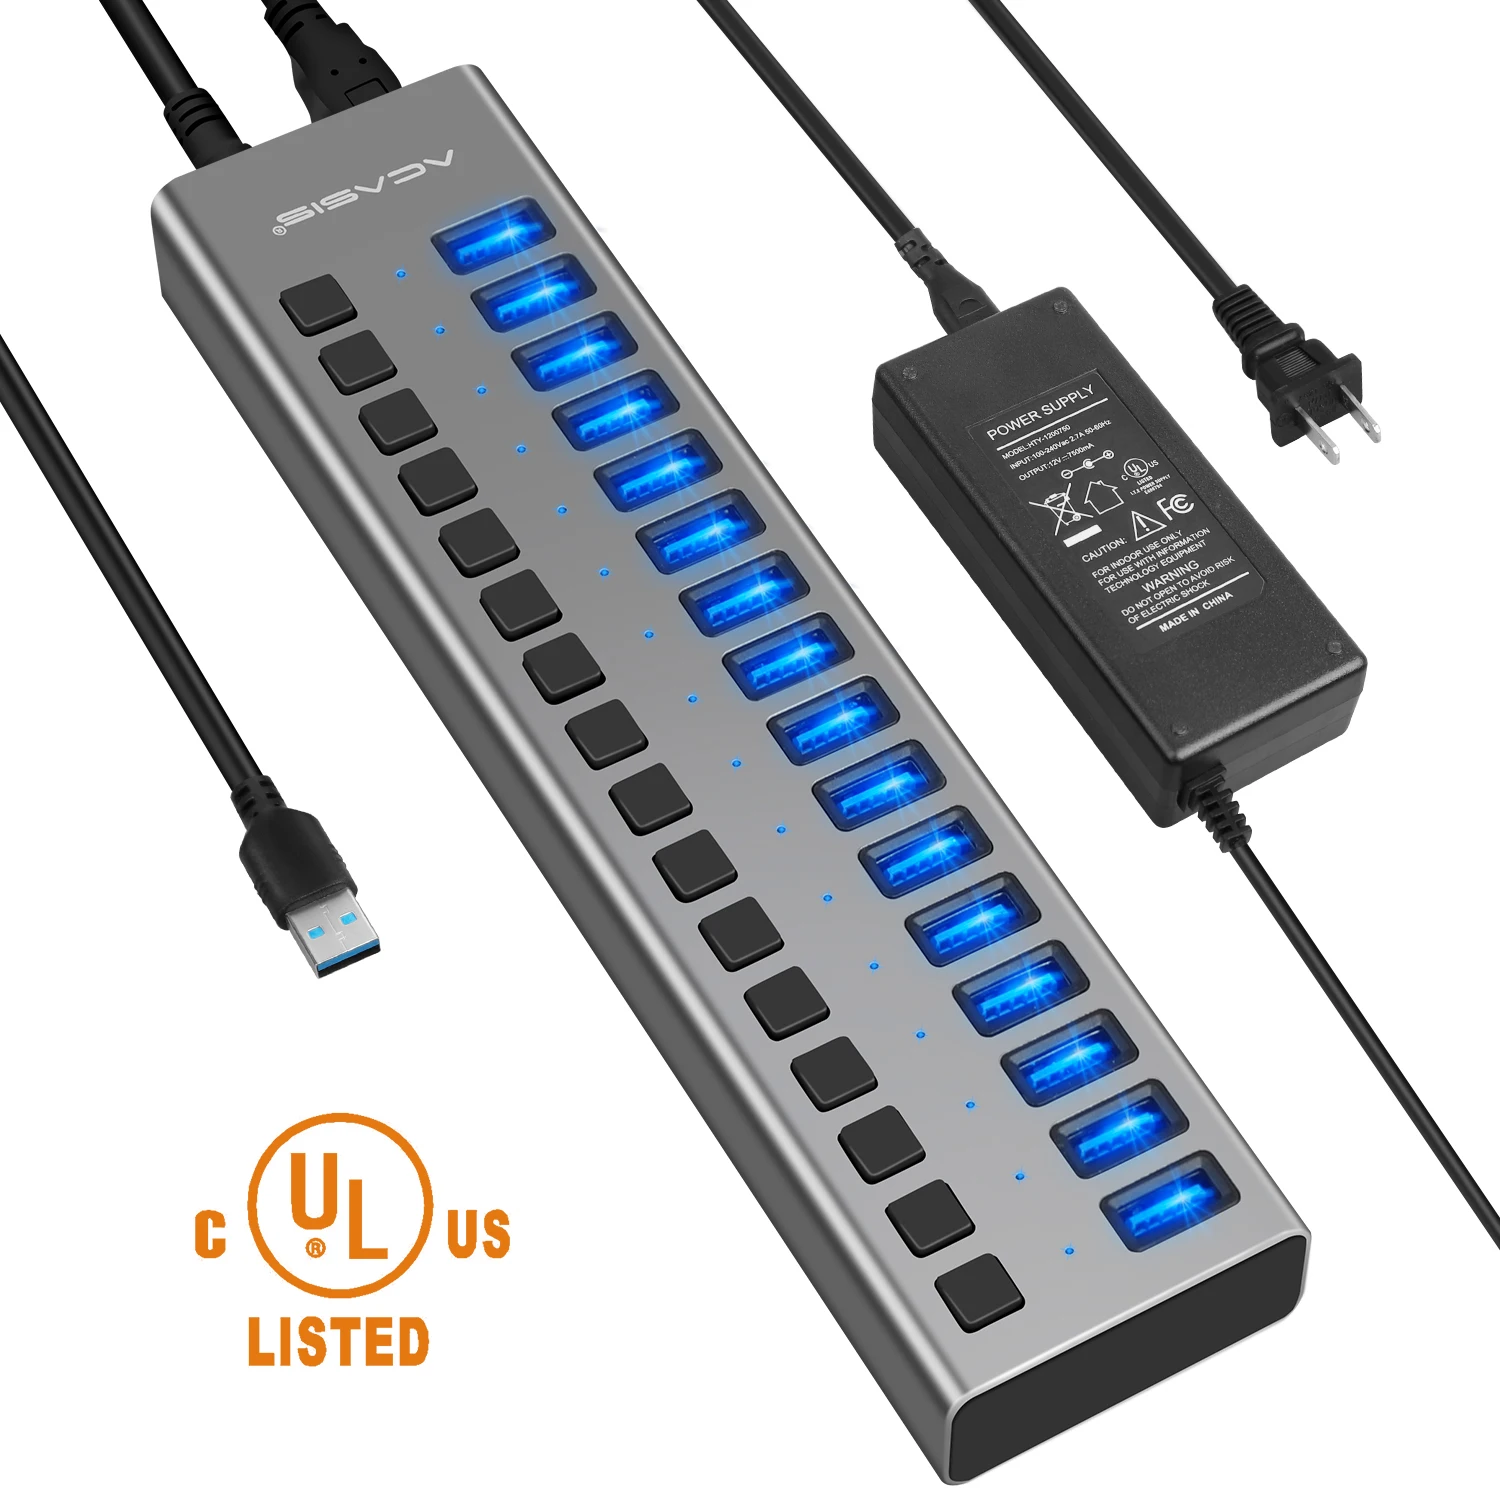 

USB 3.0 USB Hub Multiple Splitter 3 Hab Convert High-speed Adapter 4/7/10/13/16/20 Ports Multiple Expander with Switch For PC